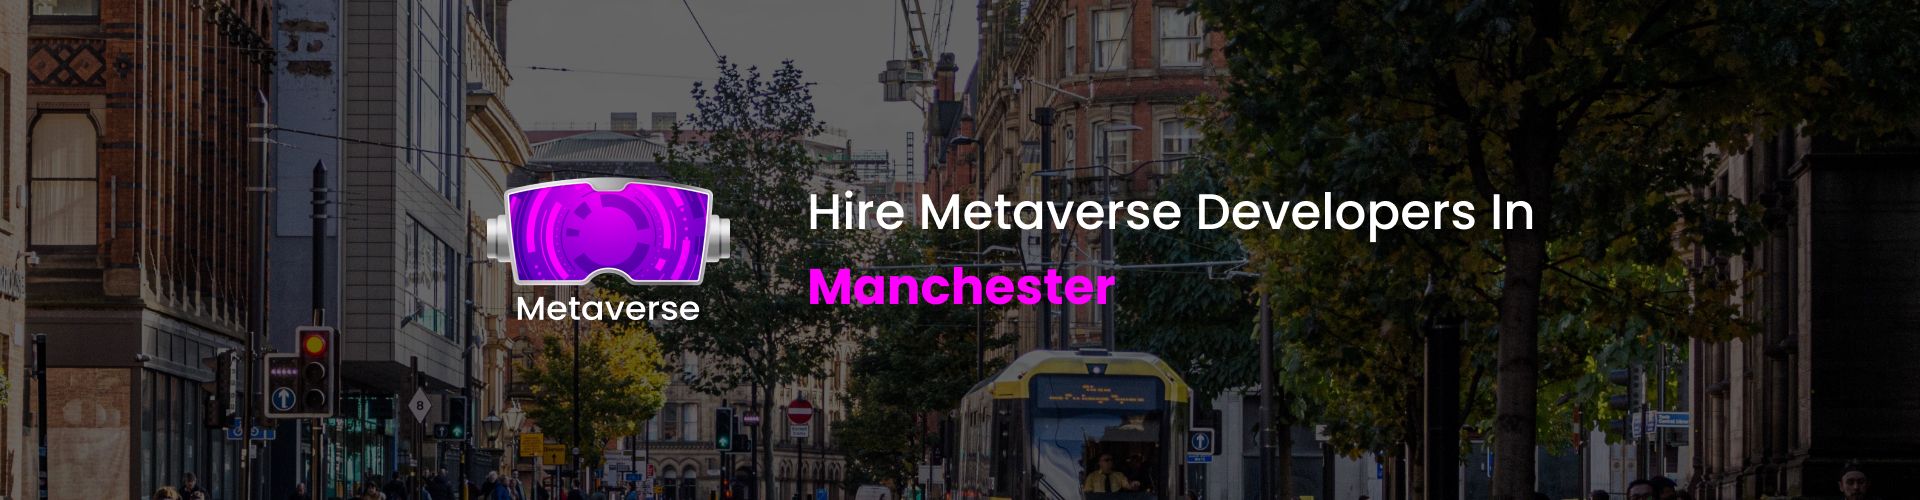 hire metaverse developers in manchester